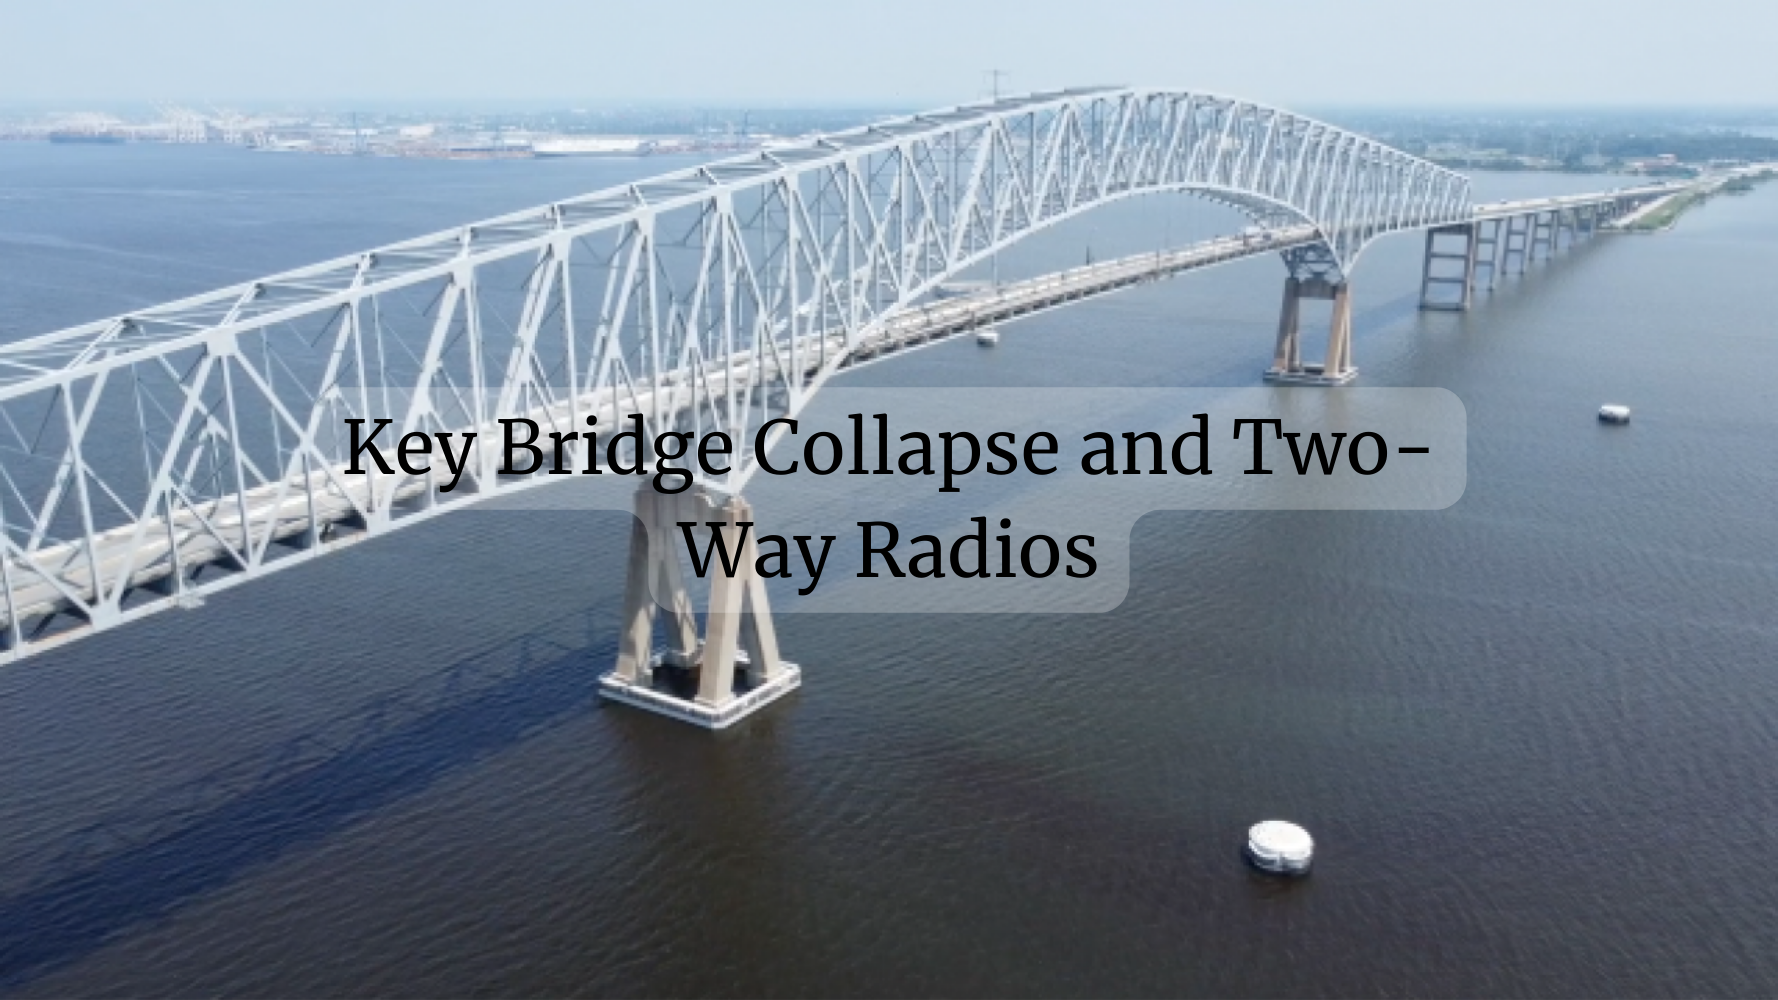 The Key Bridge Collapse and Two-Way Radios